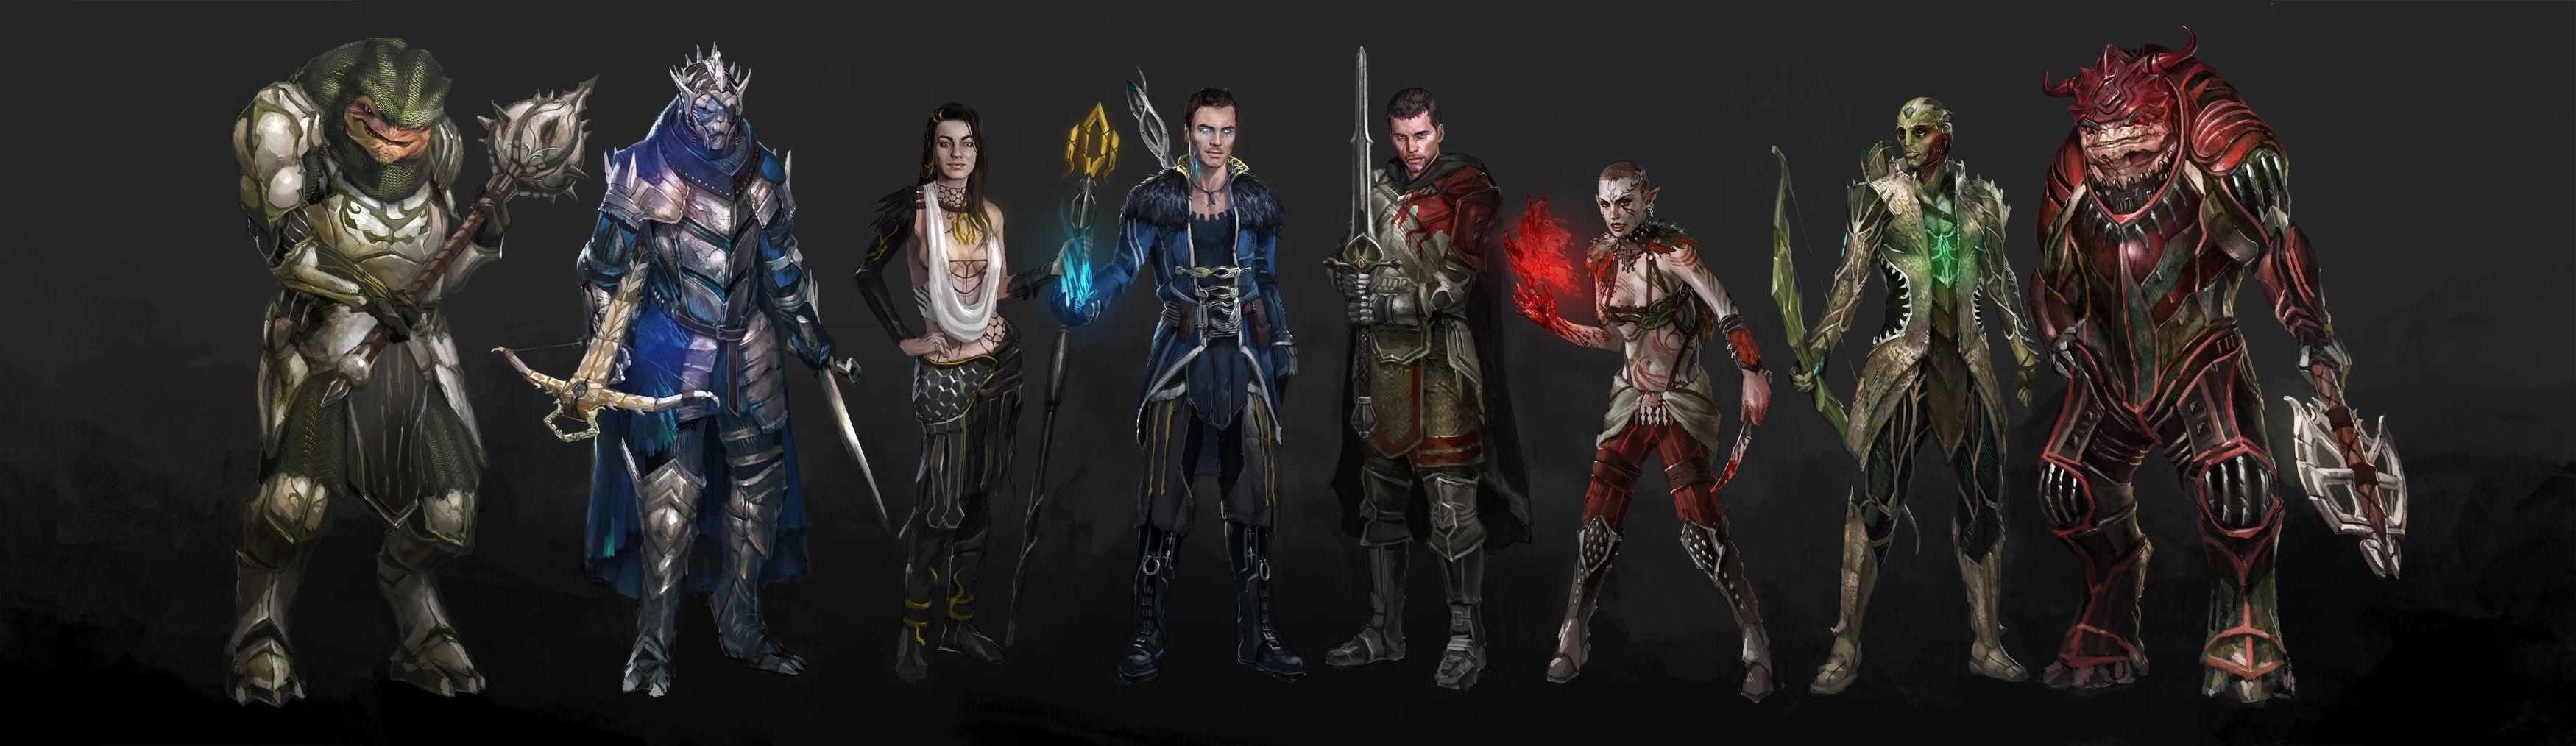 Dragon Age Meets Mass Effect In This Fan Made &;Dragon Effect